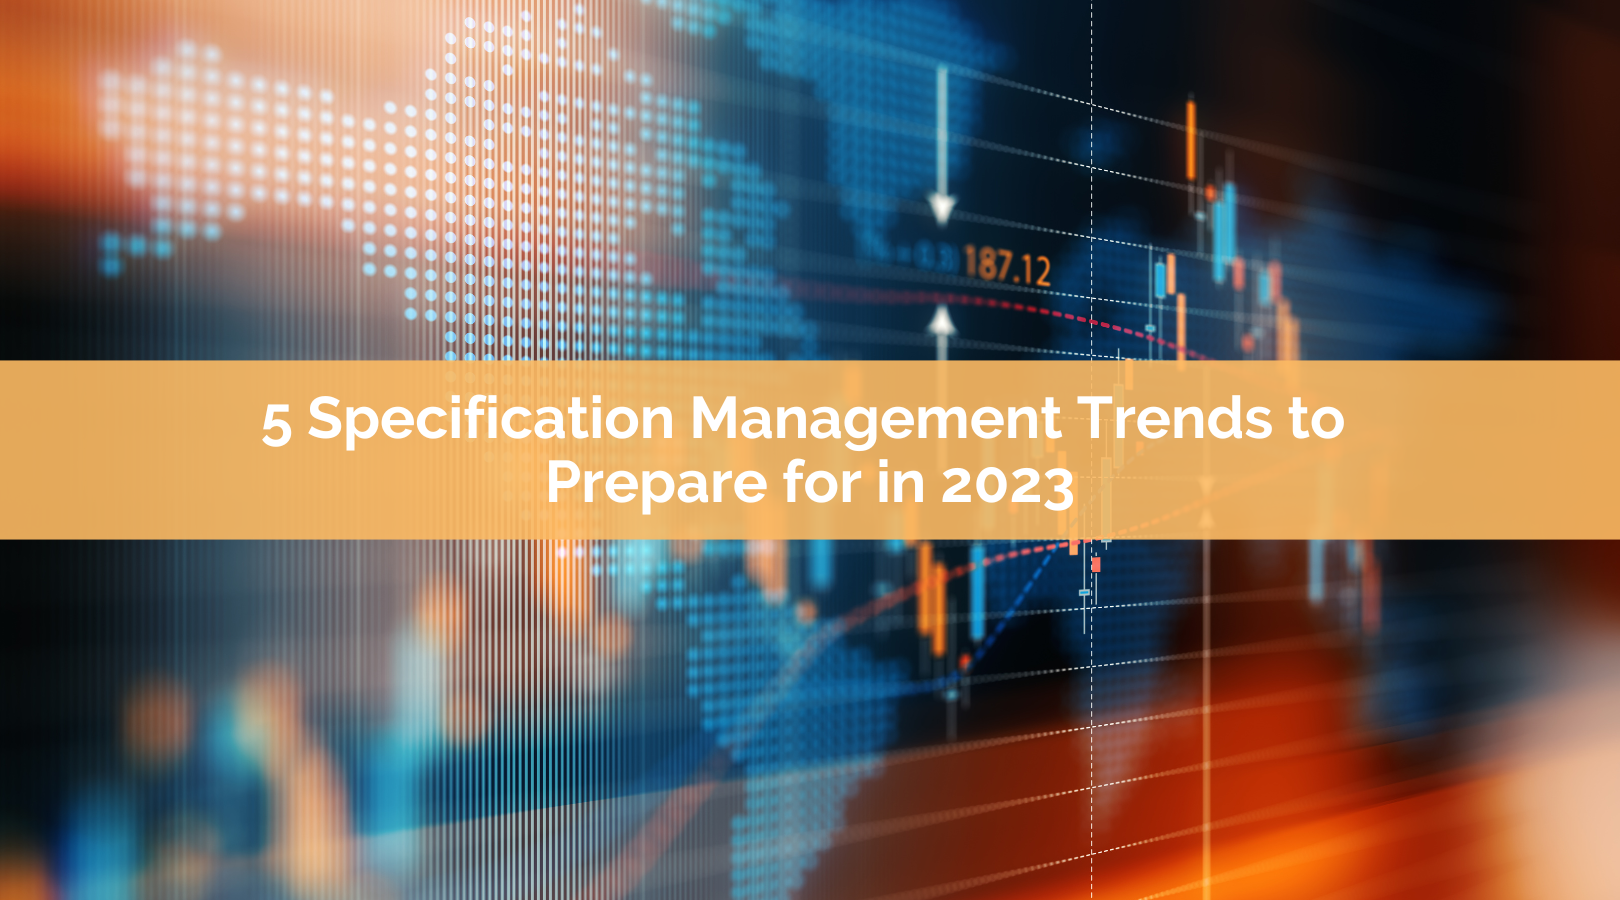 5 Specification Management Trends to Prepare for in 2023